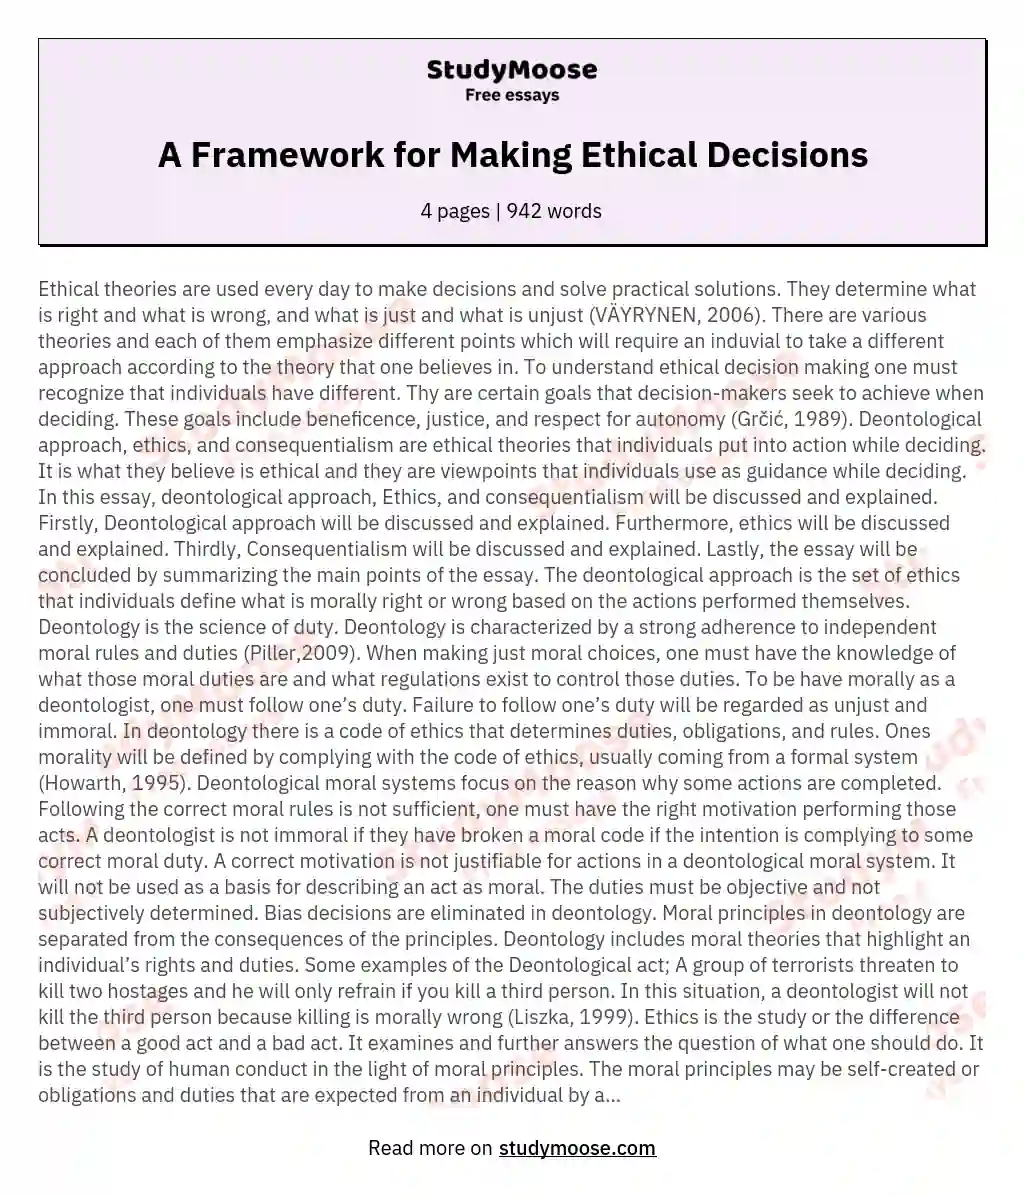 A Framework for Making Ethical Decisions essay